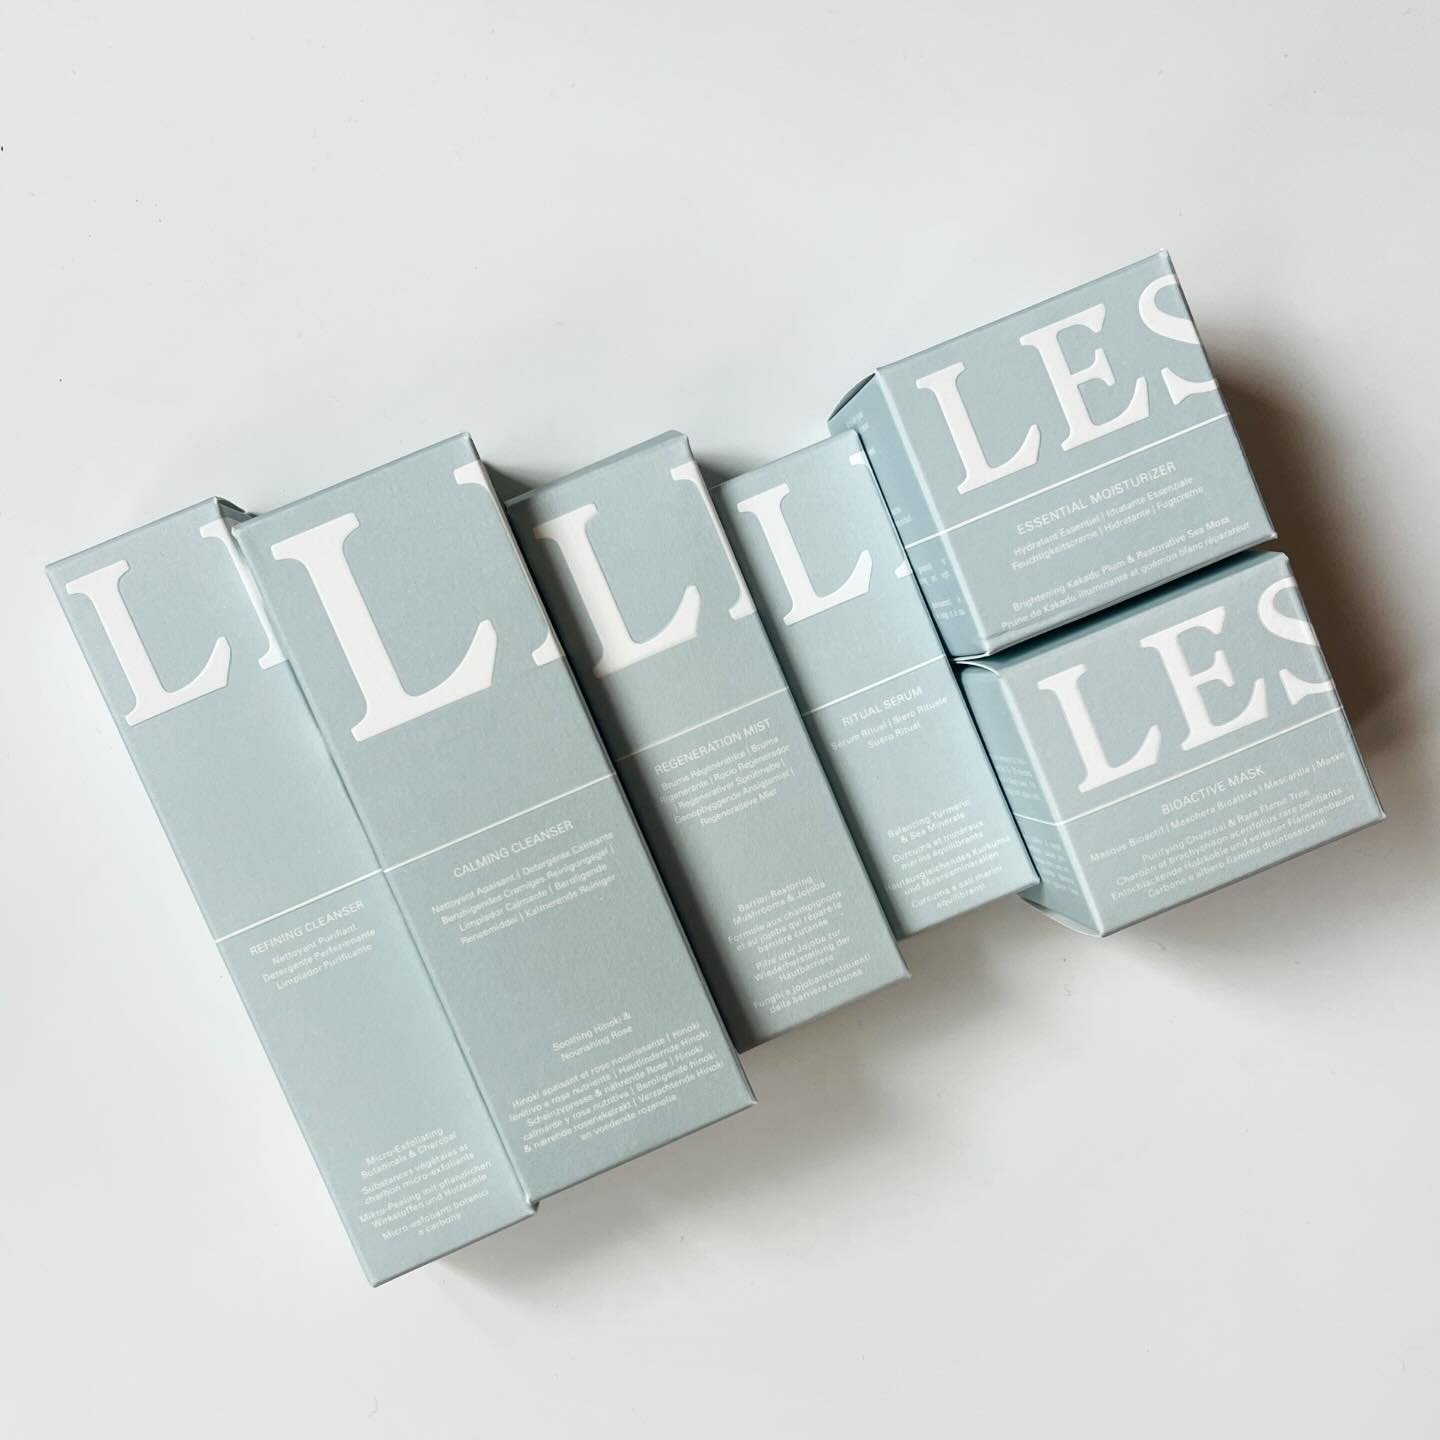 Introducing the newest addition to our skincare lineup @lesseofficial . This innovative, ritual based brand uses only organically grown, potent ingredients that support and strengthen sensitive skin. I absolutely love their simplified yet highly effe